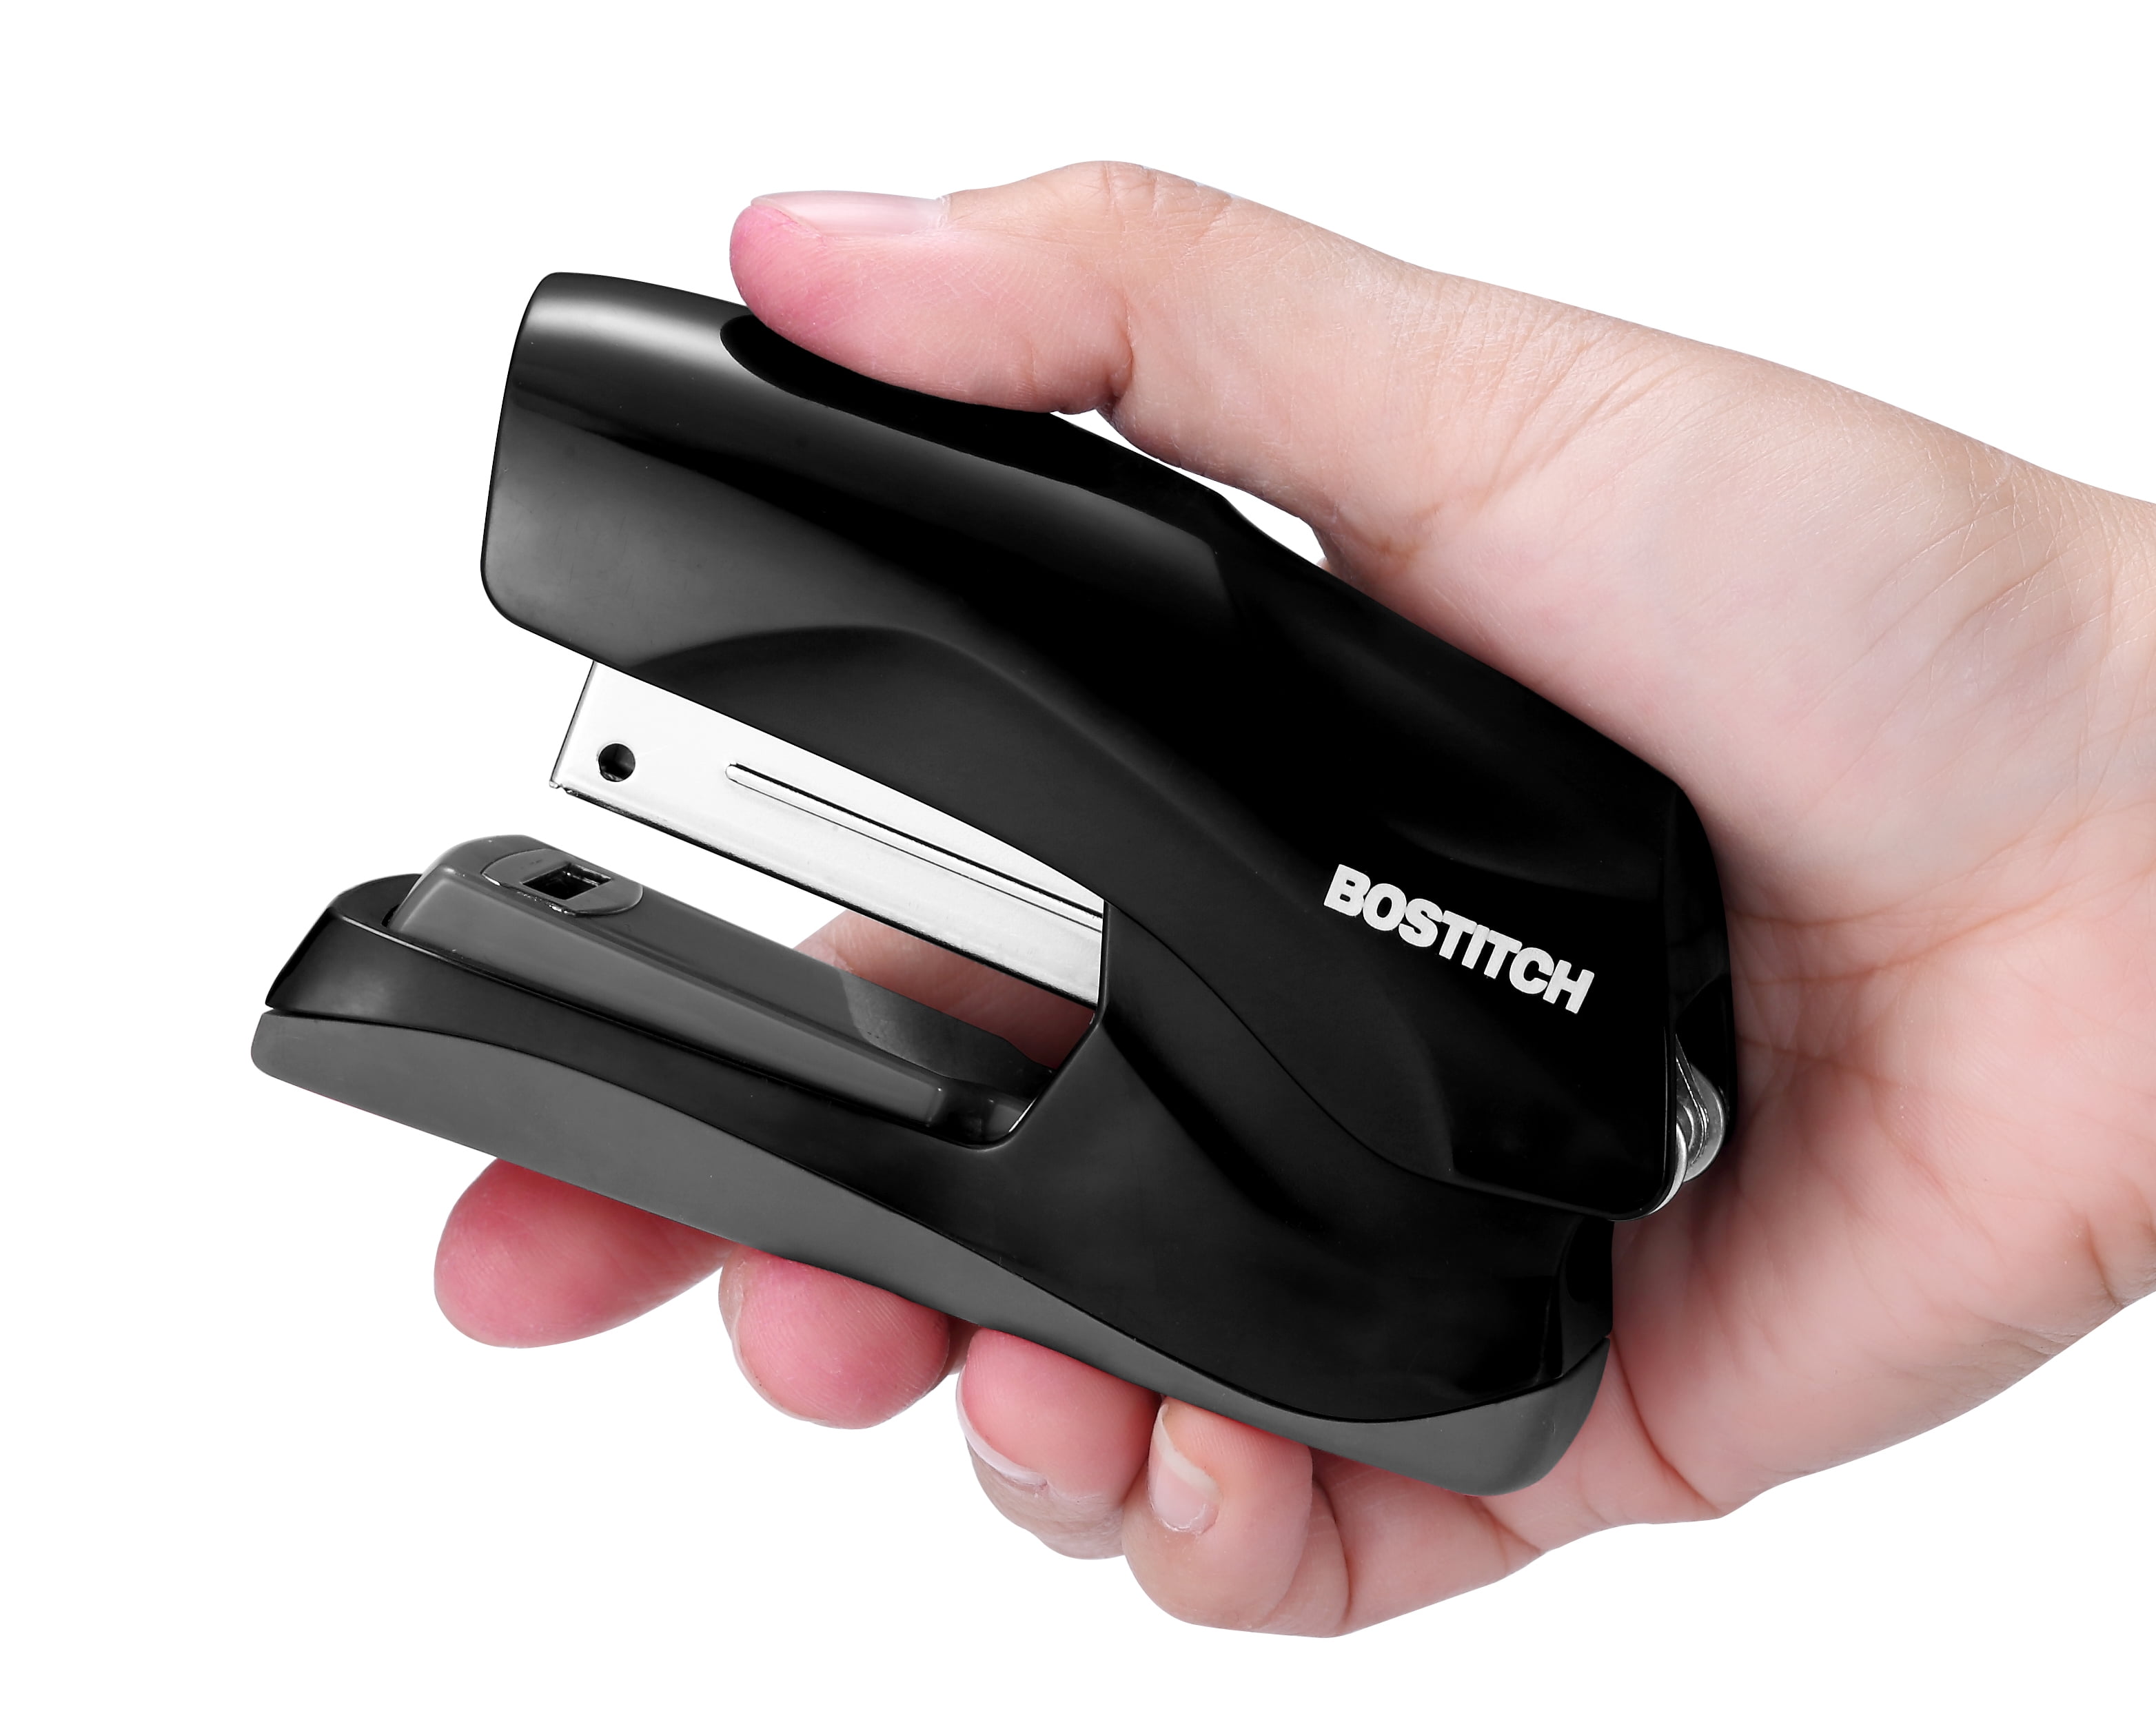 Fits into The Palm of Your Hand; Black Small Stapler Size !!. 0 - Black, #. 0 1 Pack Bostitch Office Heavy Duty 40 Sheet Stapler B175-BLK 